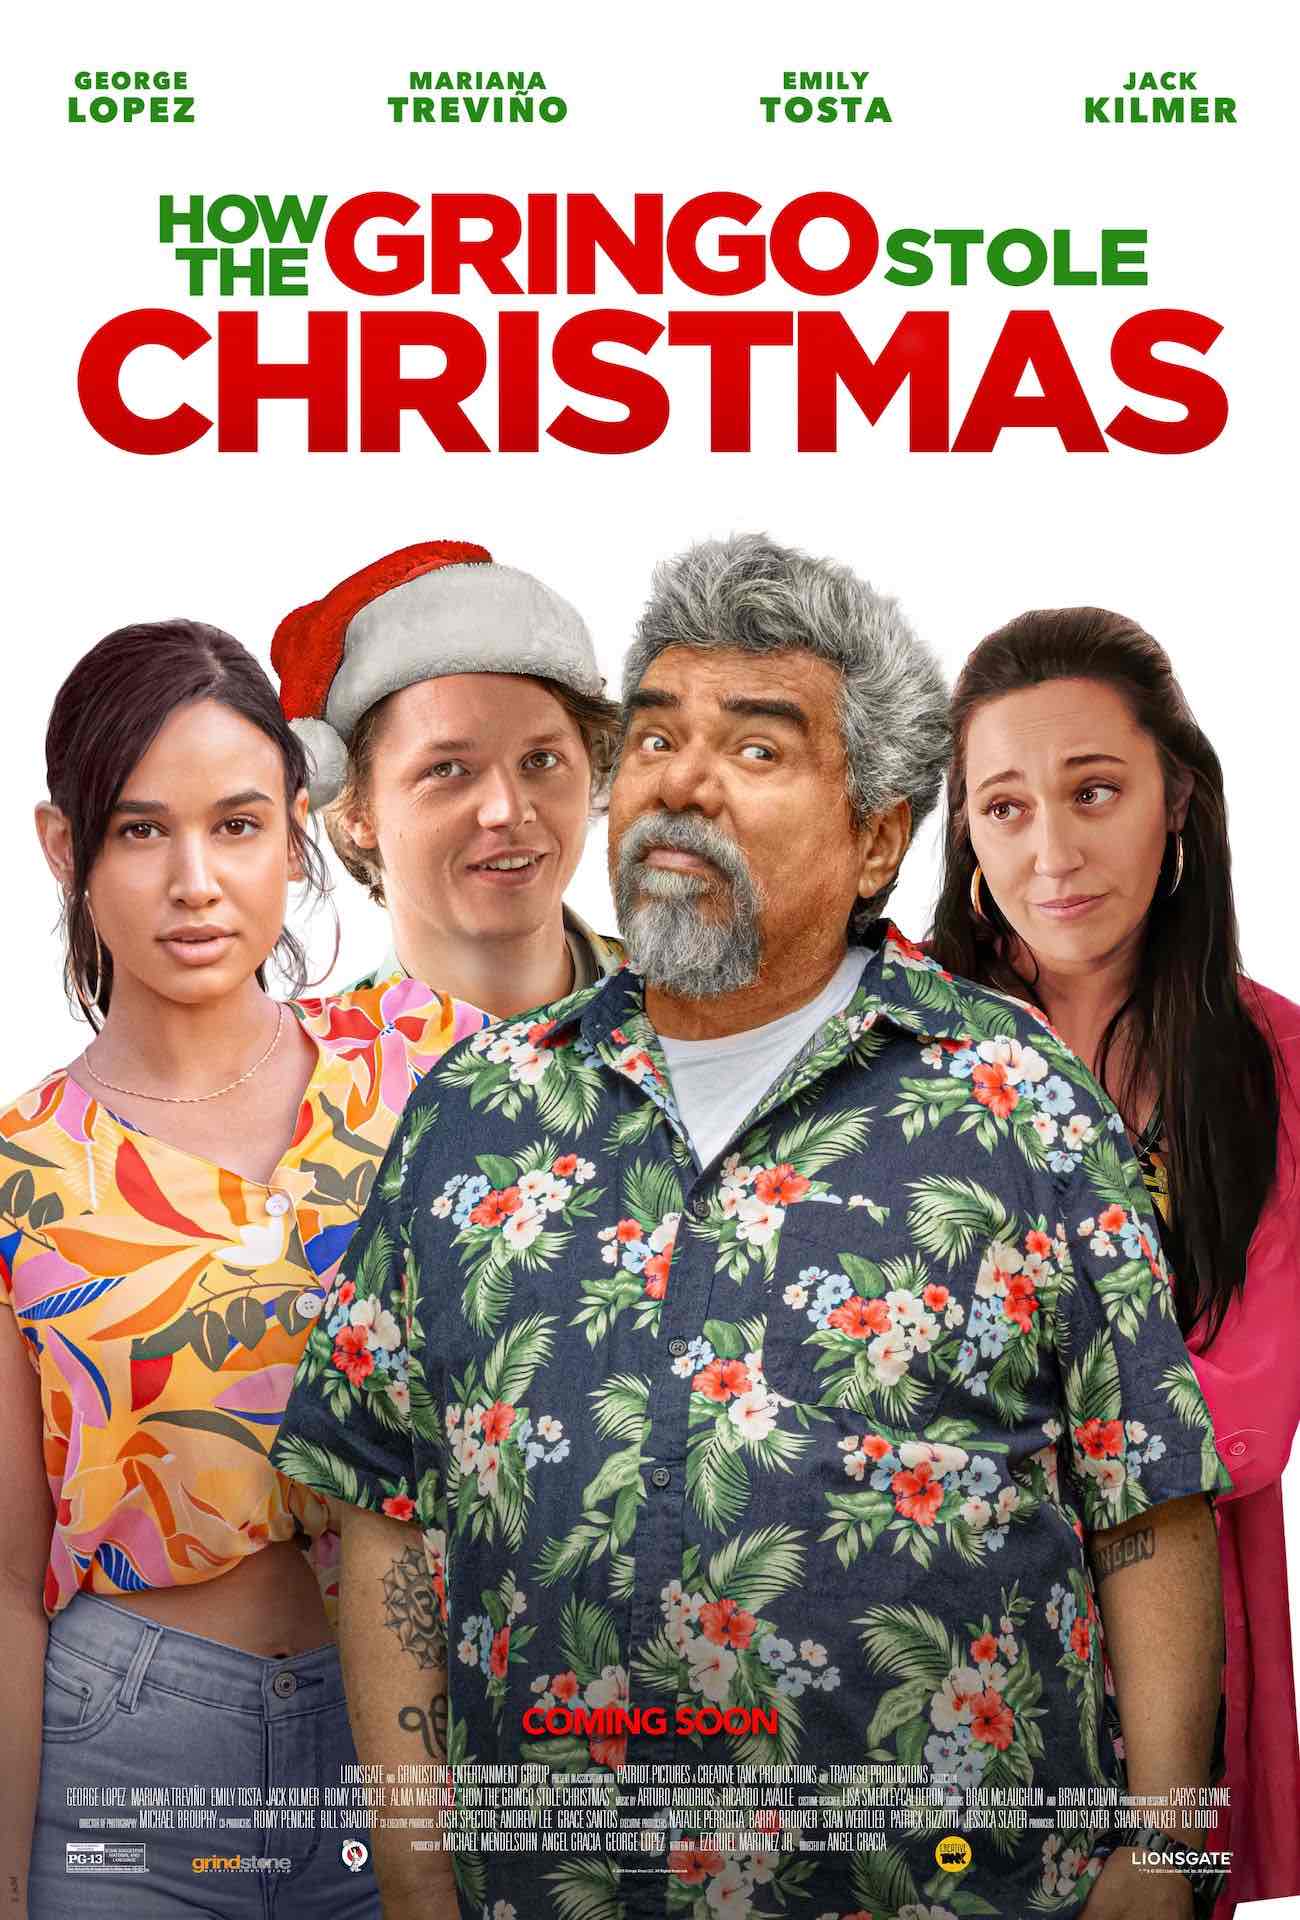 THEATRICAL POSTER FOR HOW THE GRINGO STOLE CHRISTMAS. IMAGE COURTESY OF LIONSGATE FILMS.